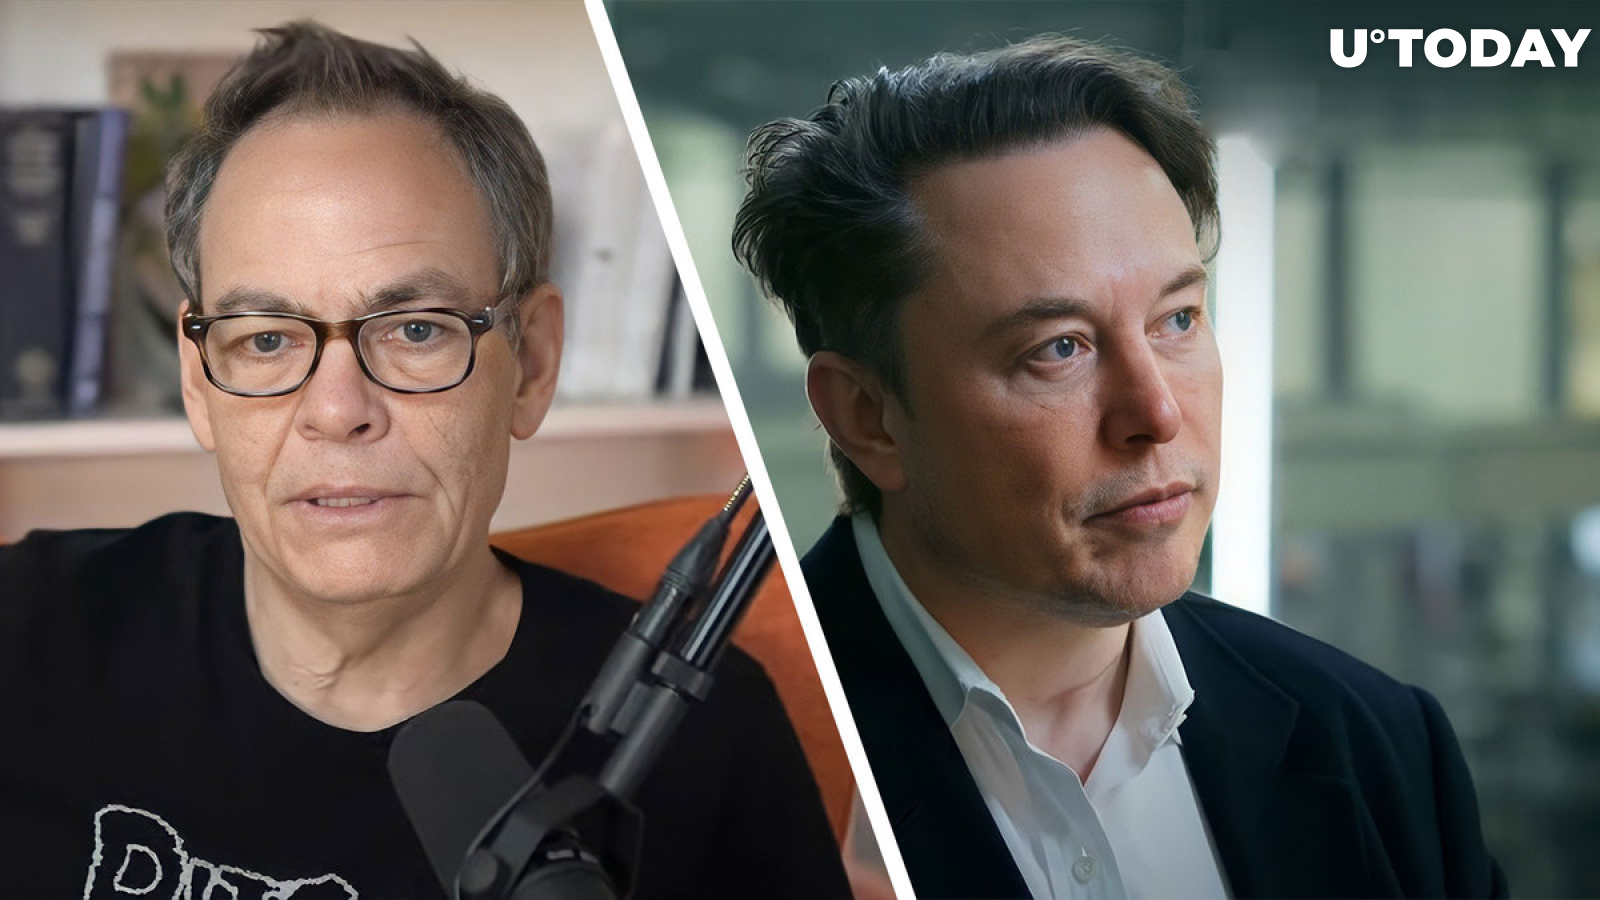 Max Keiser and Elon Musk Criticize AI, Here's What Bitcoin (BTC) Has to Do With It